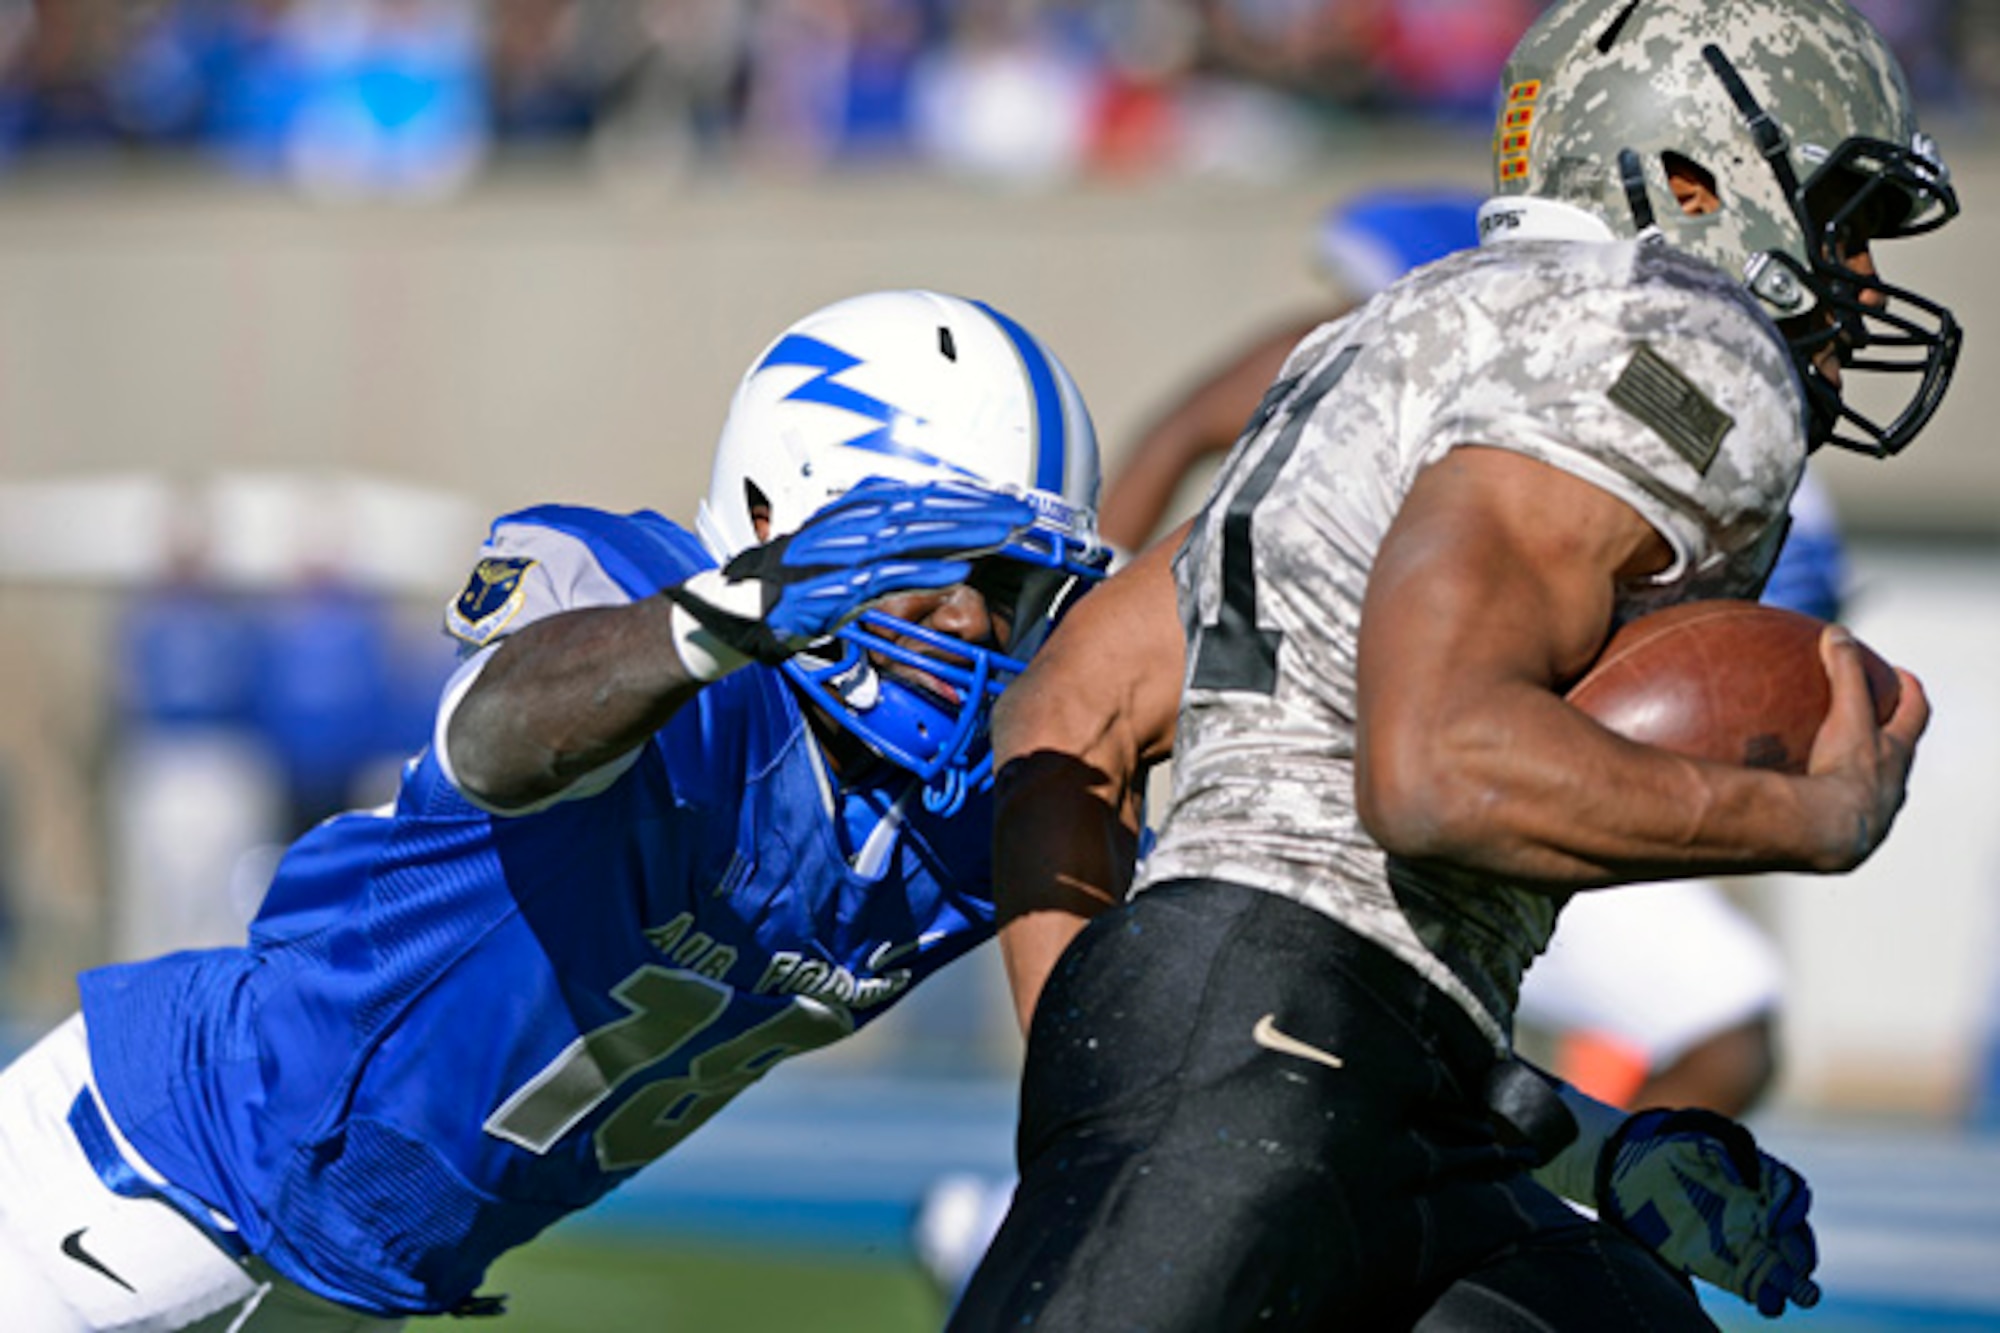 Air Force sophomore linebacker Reggie Barnes dives to tackle Army running back Terry Baggett Nov. 2, 2013, during the Air Force-Army football game at Falcon Stadium, Colorado Springs, Colo. The Falcons defense held the Black Knights to just seven points in the second half, giving Air Force a 42-28 victory.